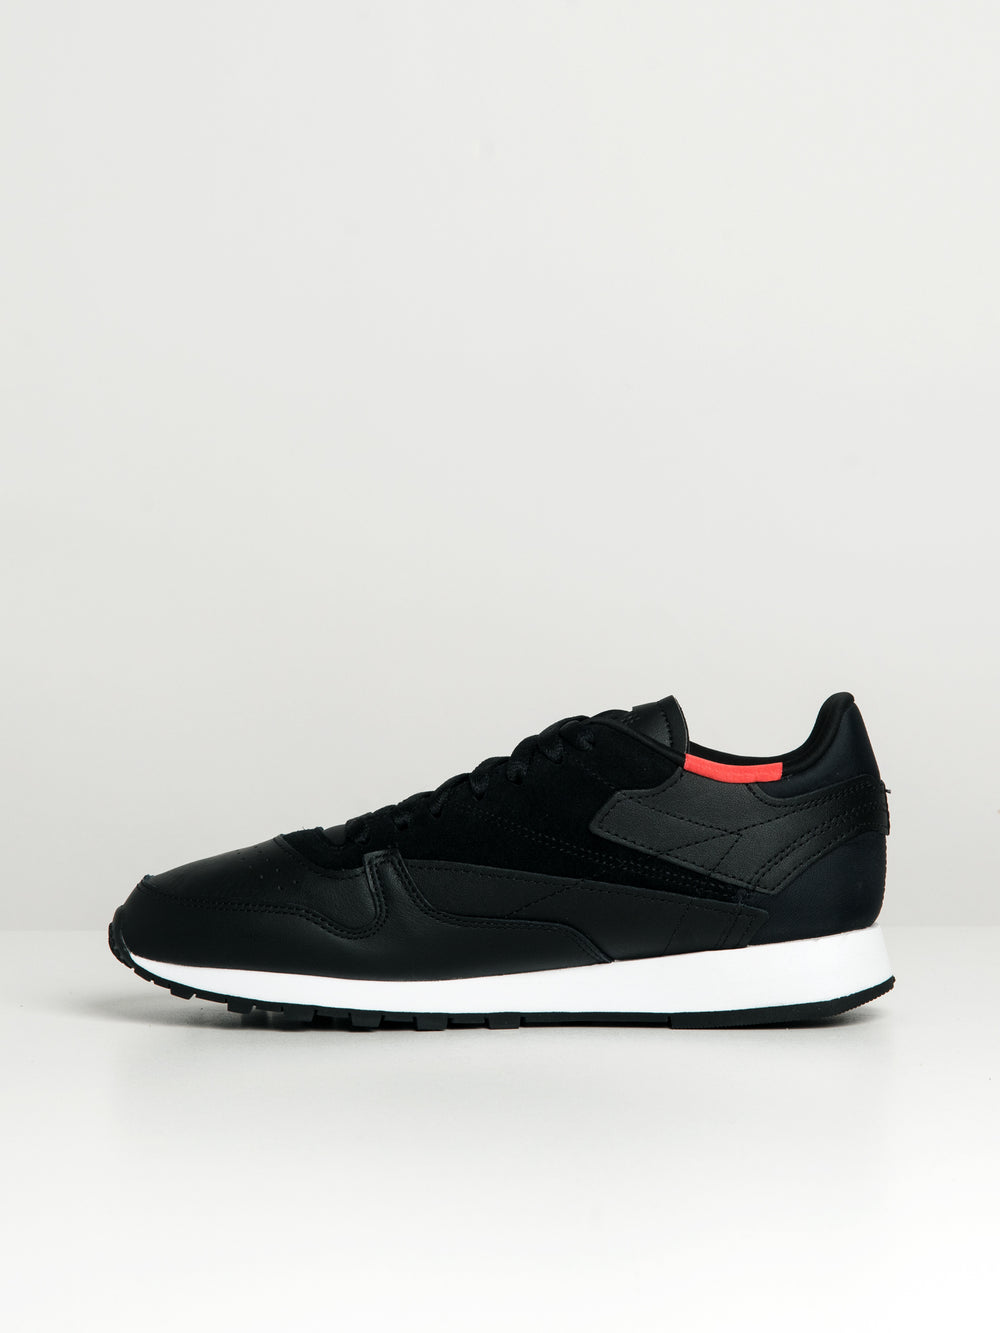 REEBOK CLASSIC LEATHER SNEAKERS MENS - CLEARANCE